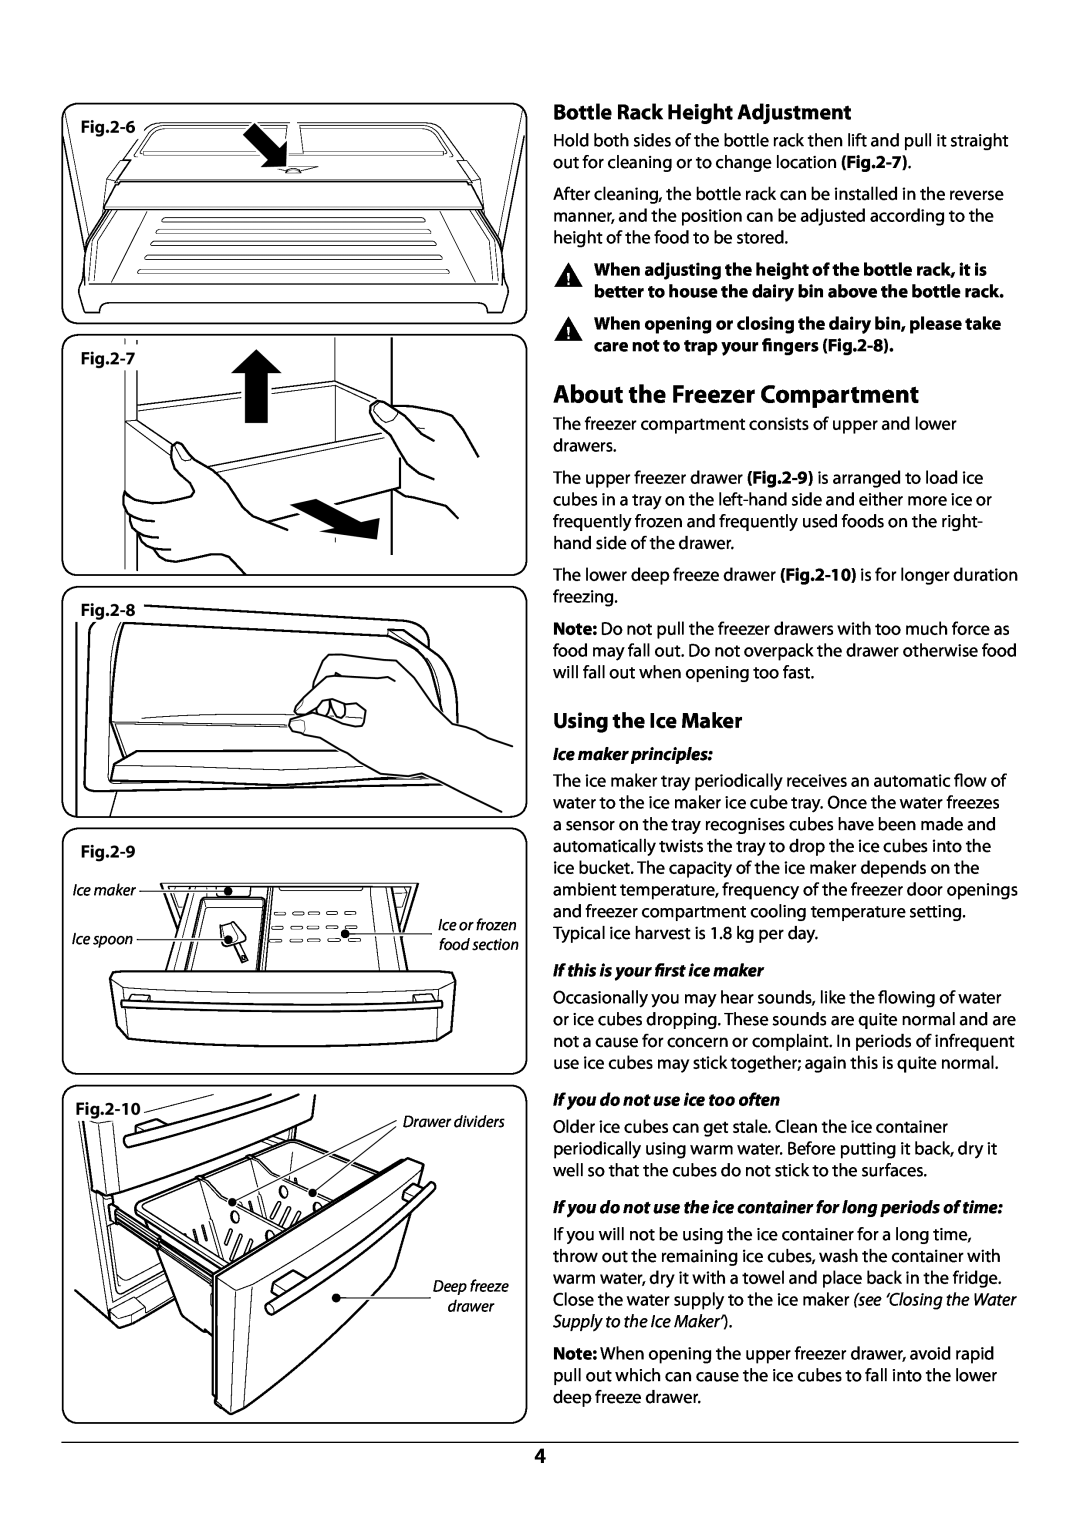 Rangemaster U109923 - 05 manual About the Freezer Compartment, Bottle Rack Height Adjustment, Using the Ice Maker, 6, 7 -8 